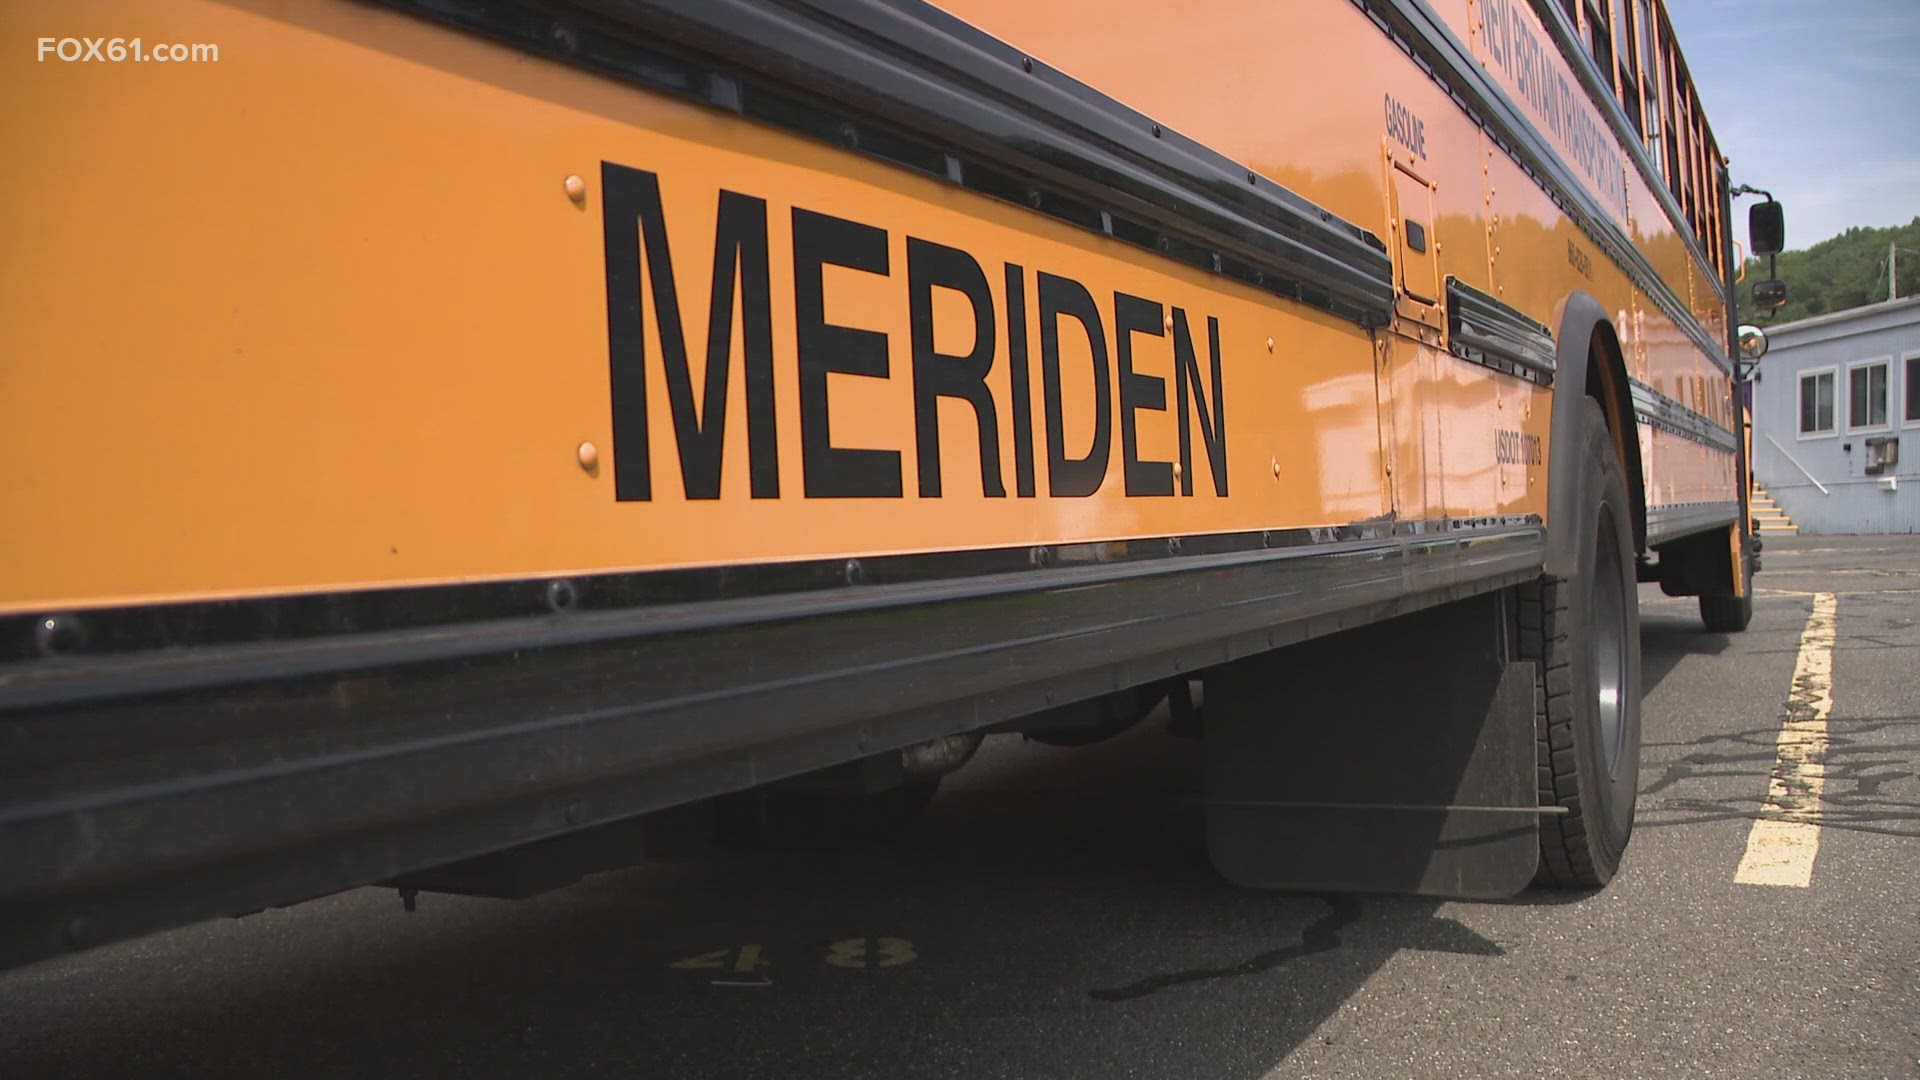 While bus drivers were on the picket line, student transportation was compromised in Meriden for two days.